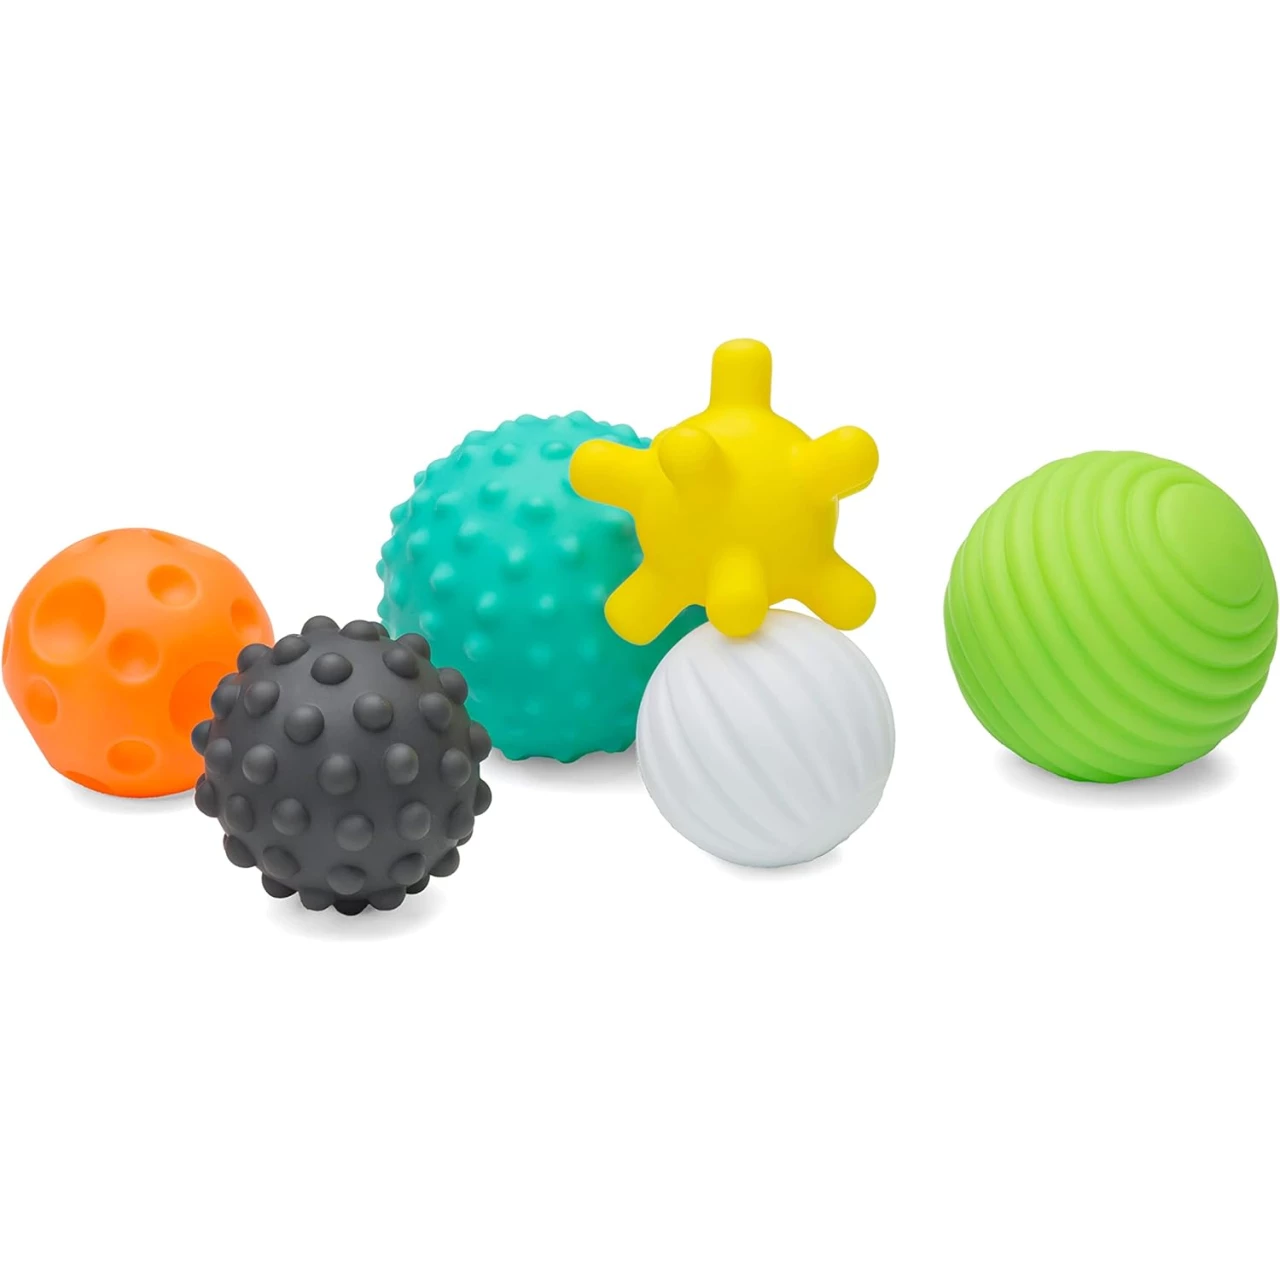 Infantino Textured Multi Ball Set - Toy for Sensory Exploration and Engagement